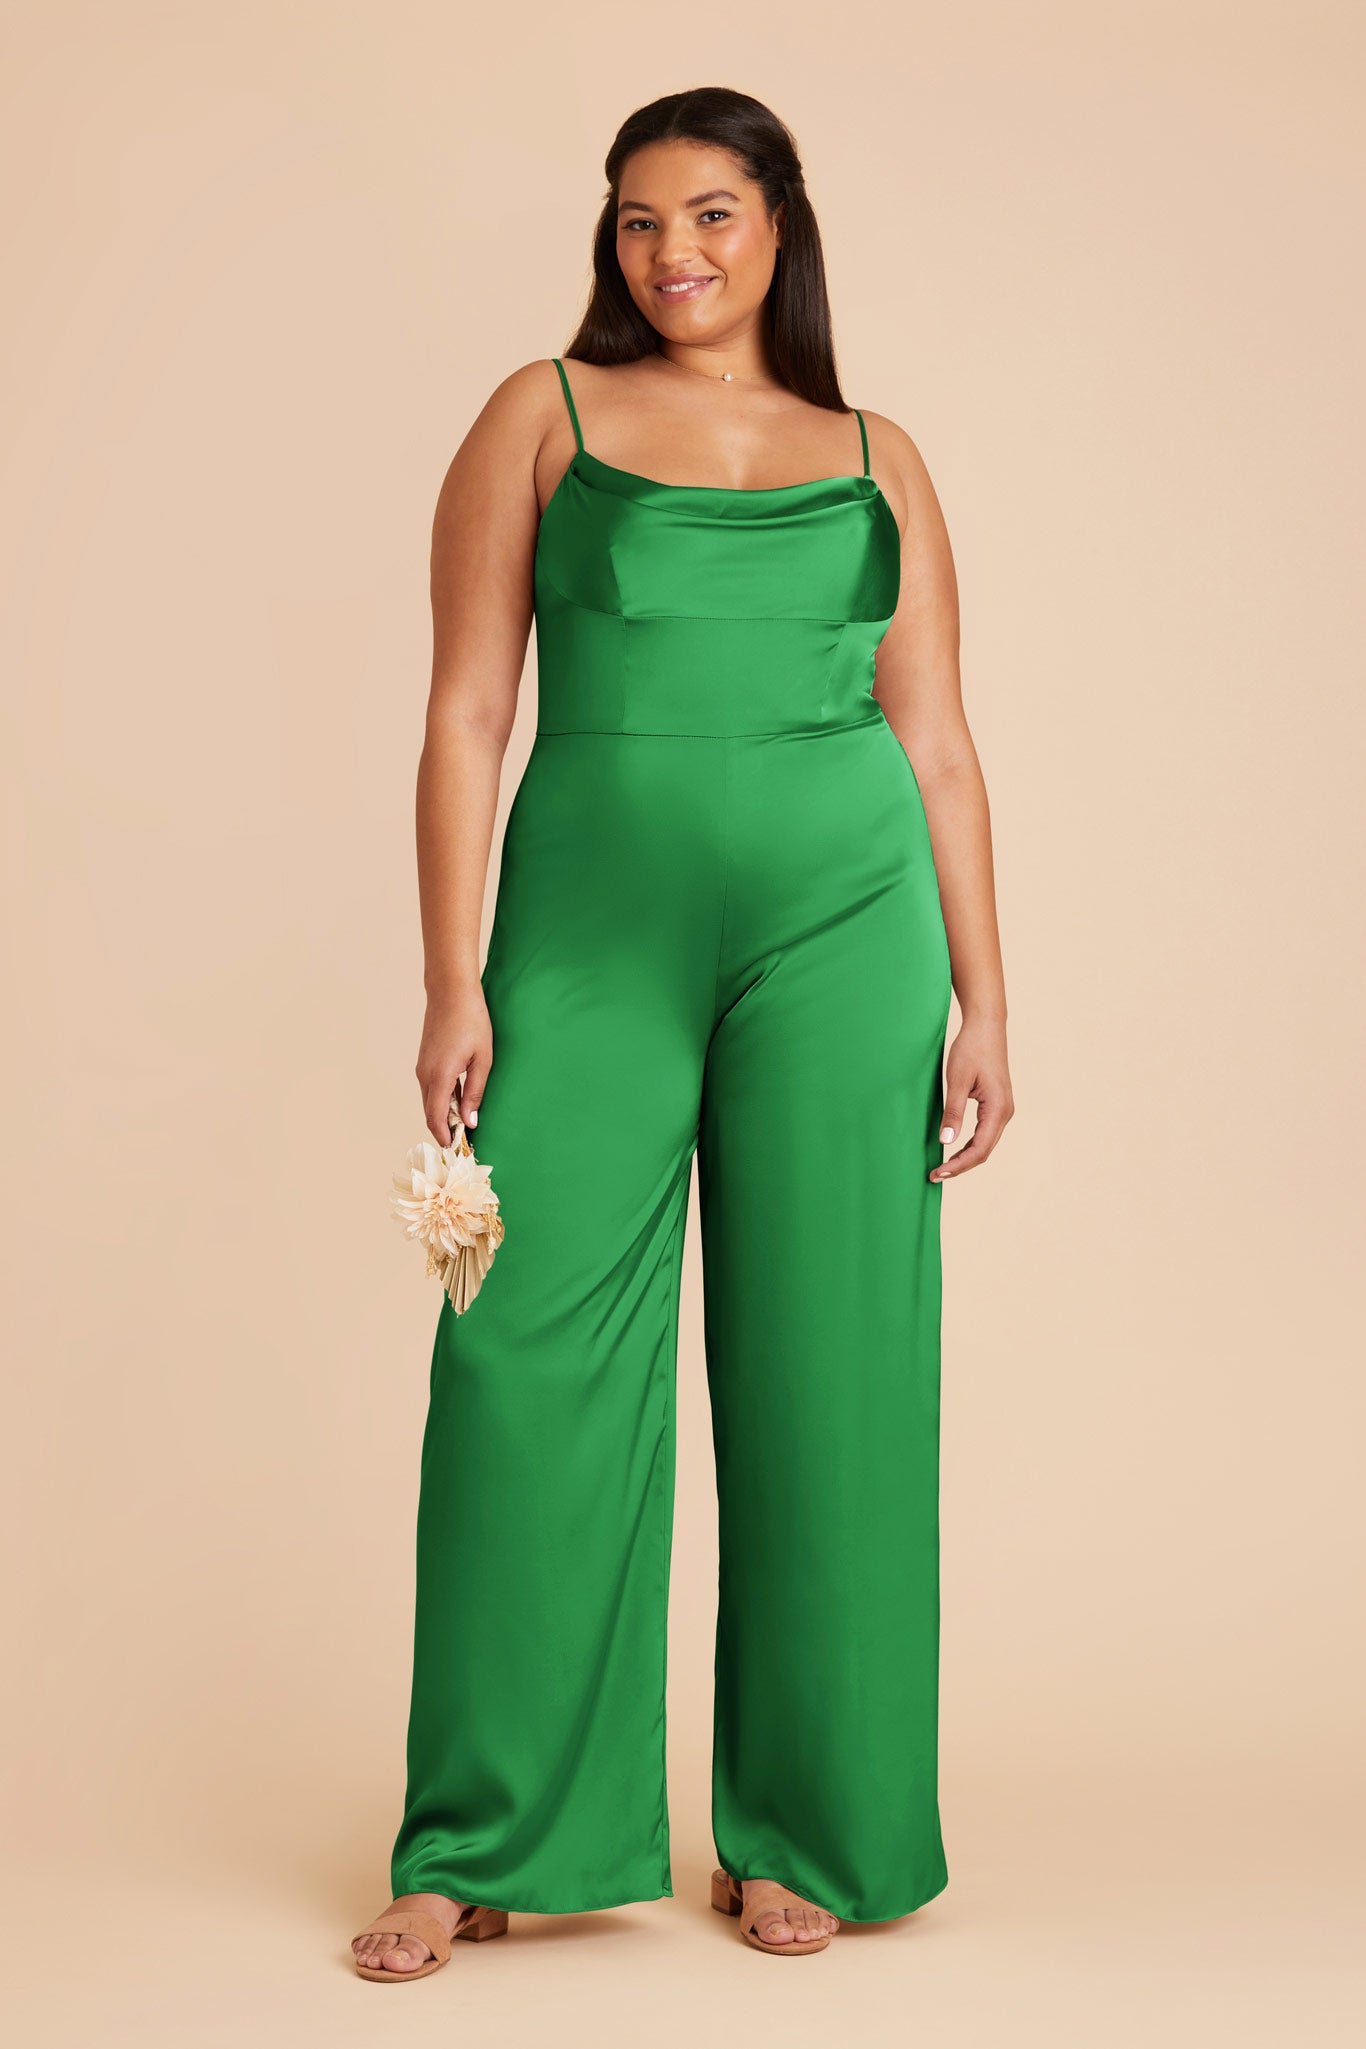 Kelly Green Donna Matte Satin Bridesmaid Jumpsuit by Birdy Grey